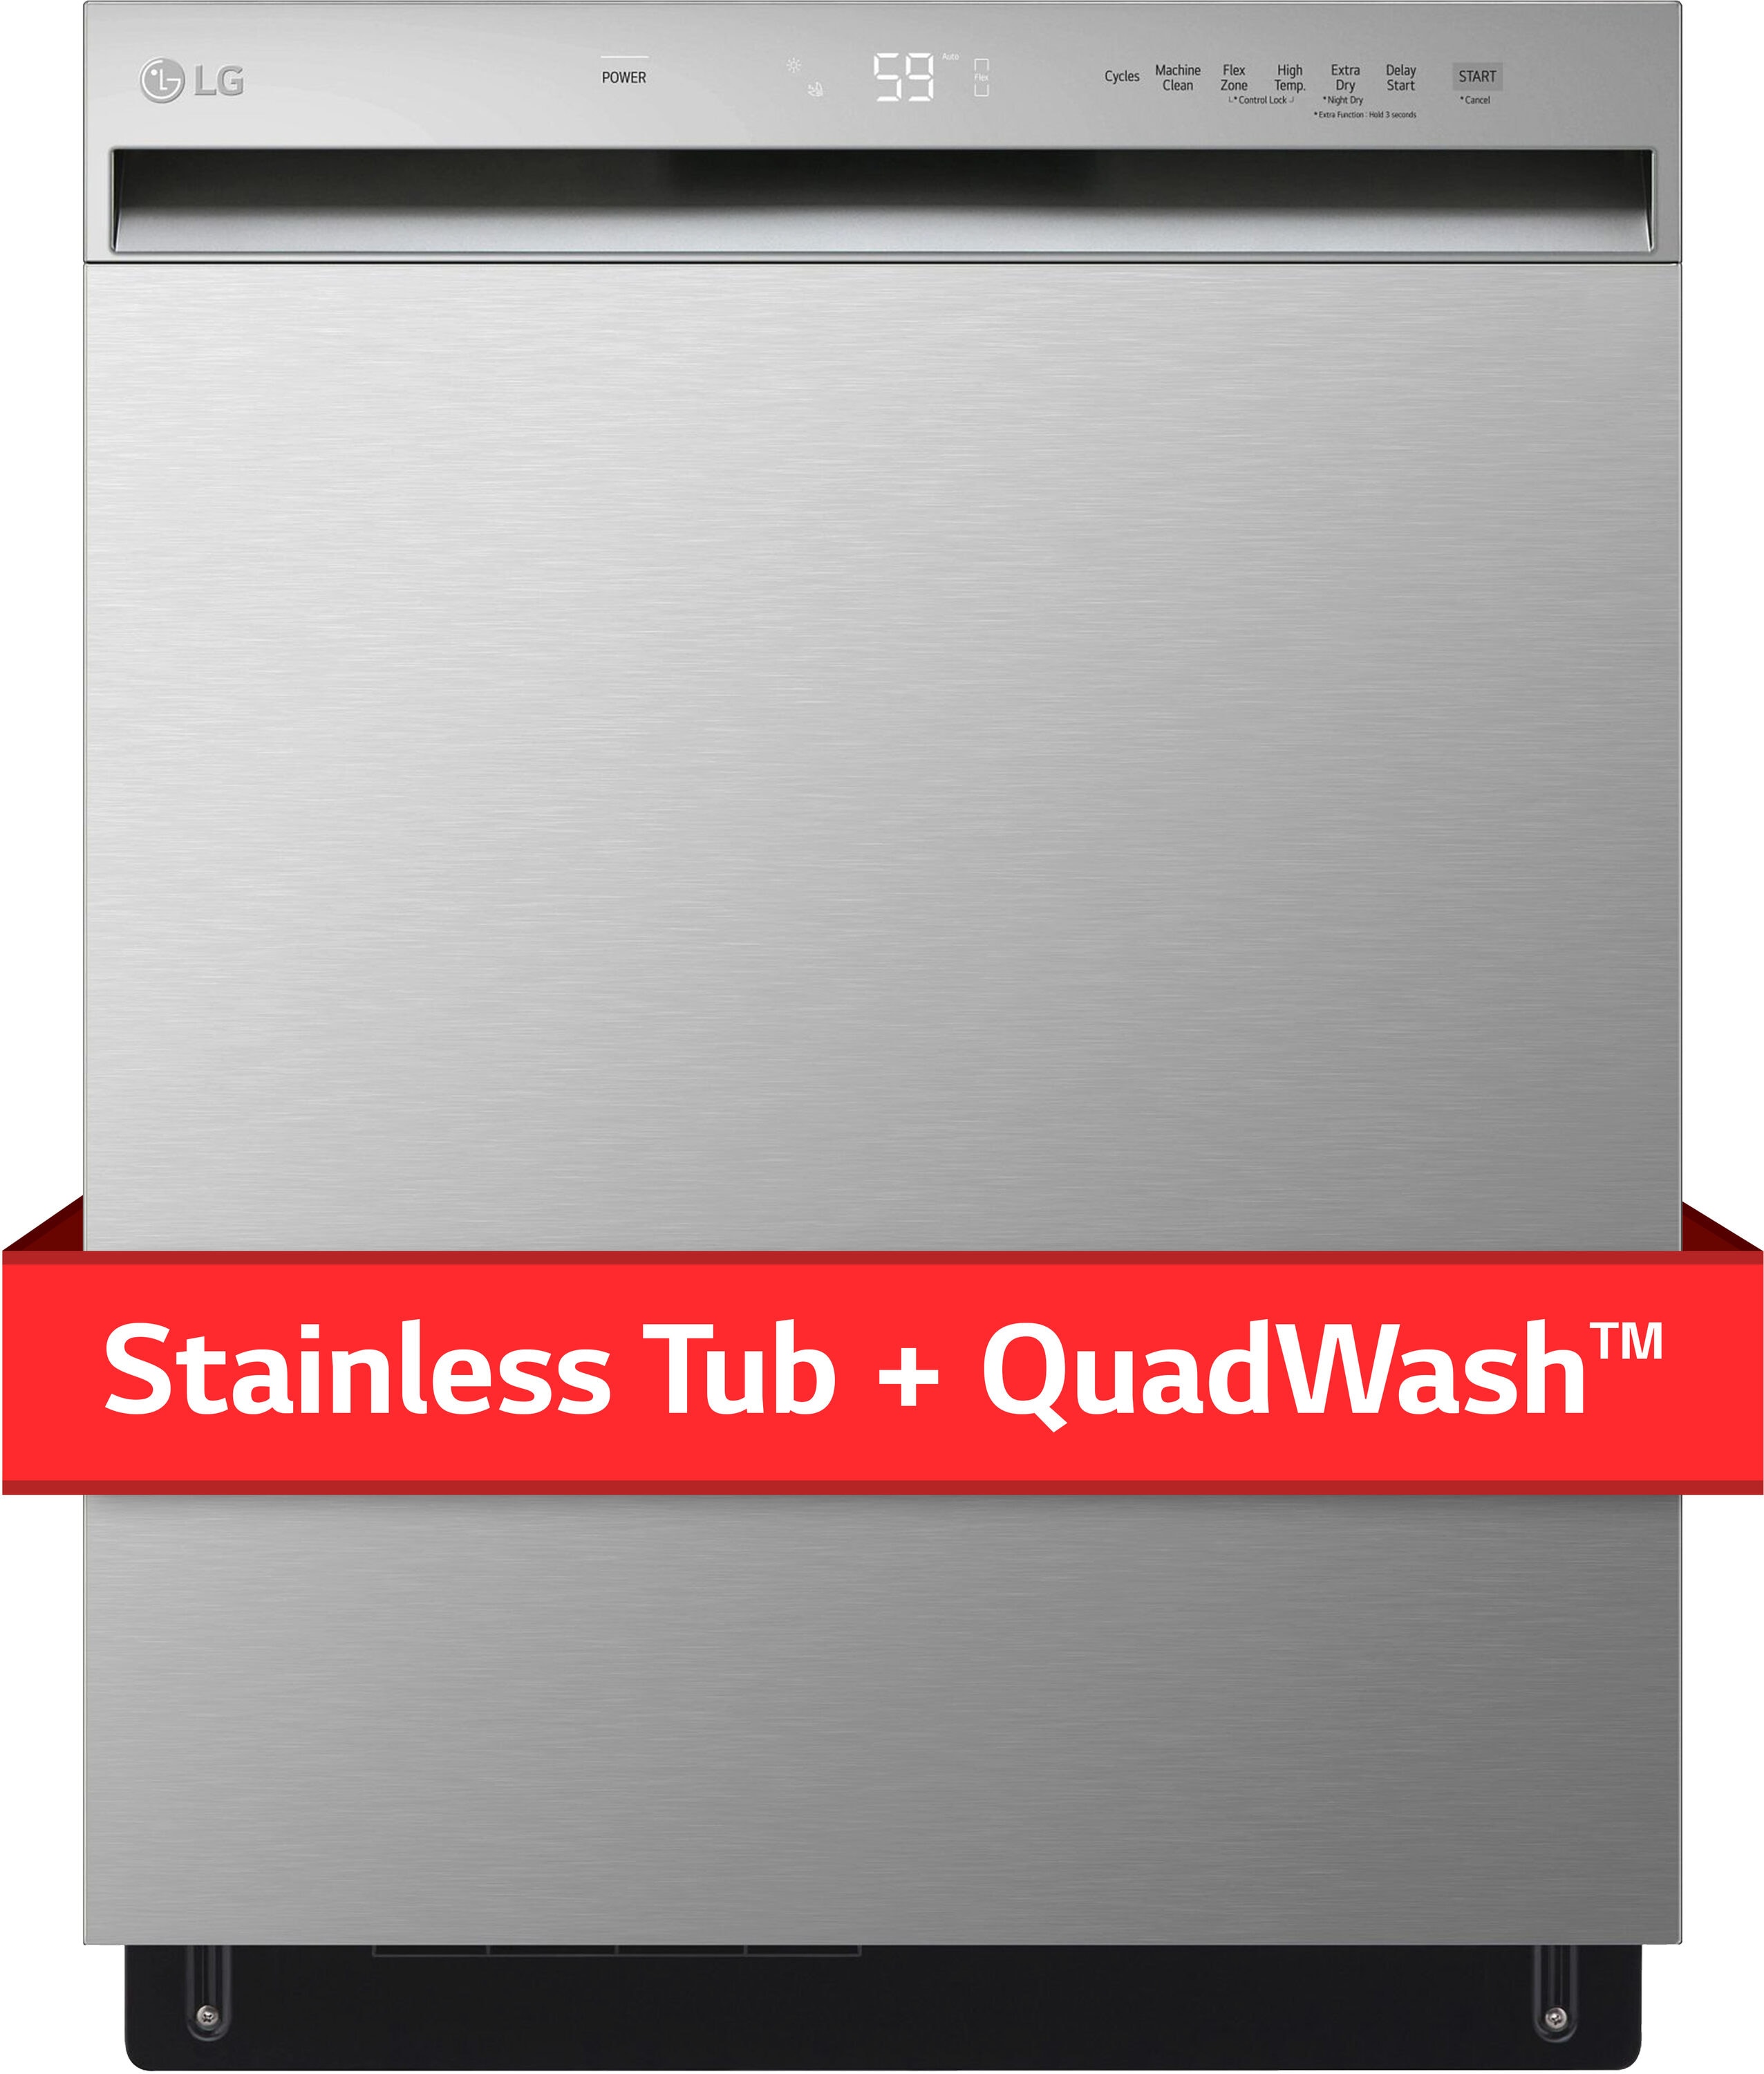 QuadWash Front Control 24-in Built-In Dishwasher (Printproof Stainless Steel) ENERGY STAR, 50-dBA | - LG LDFN343LS